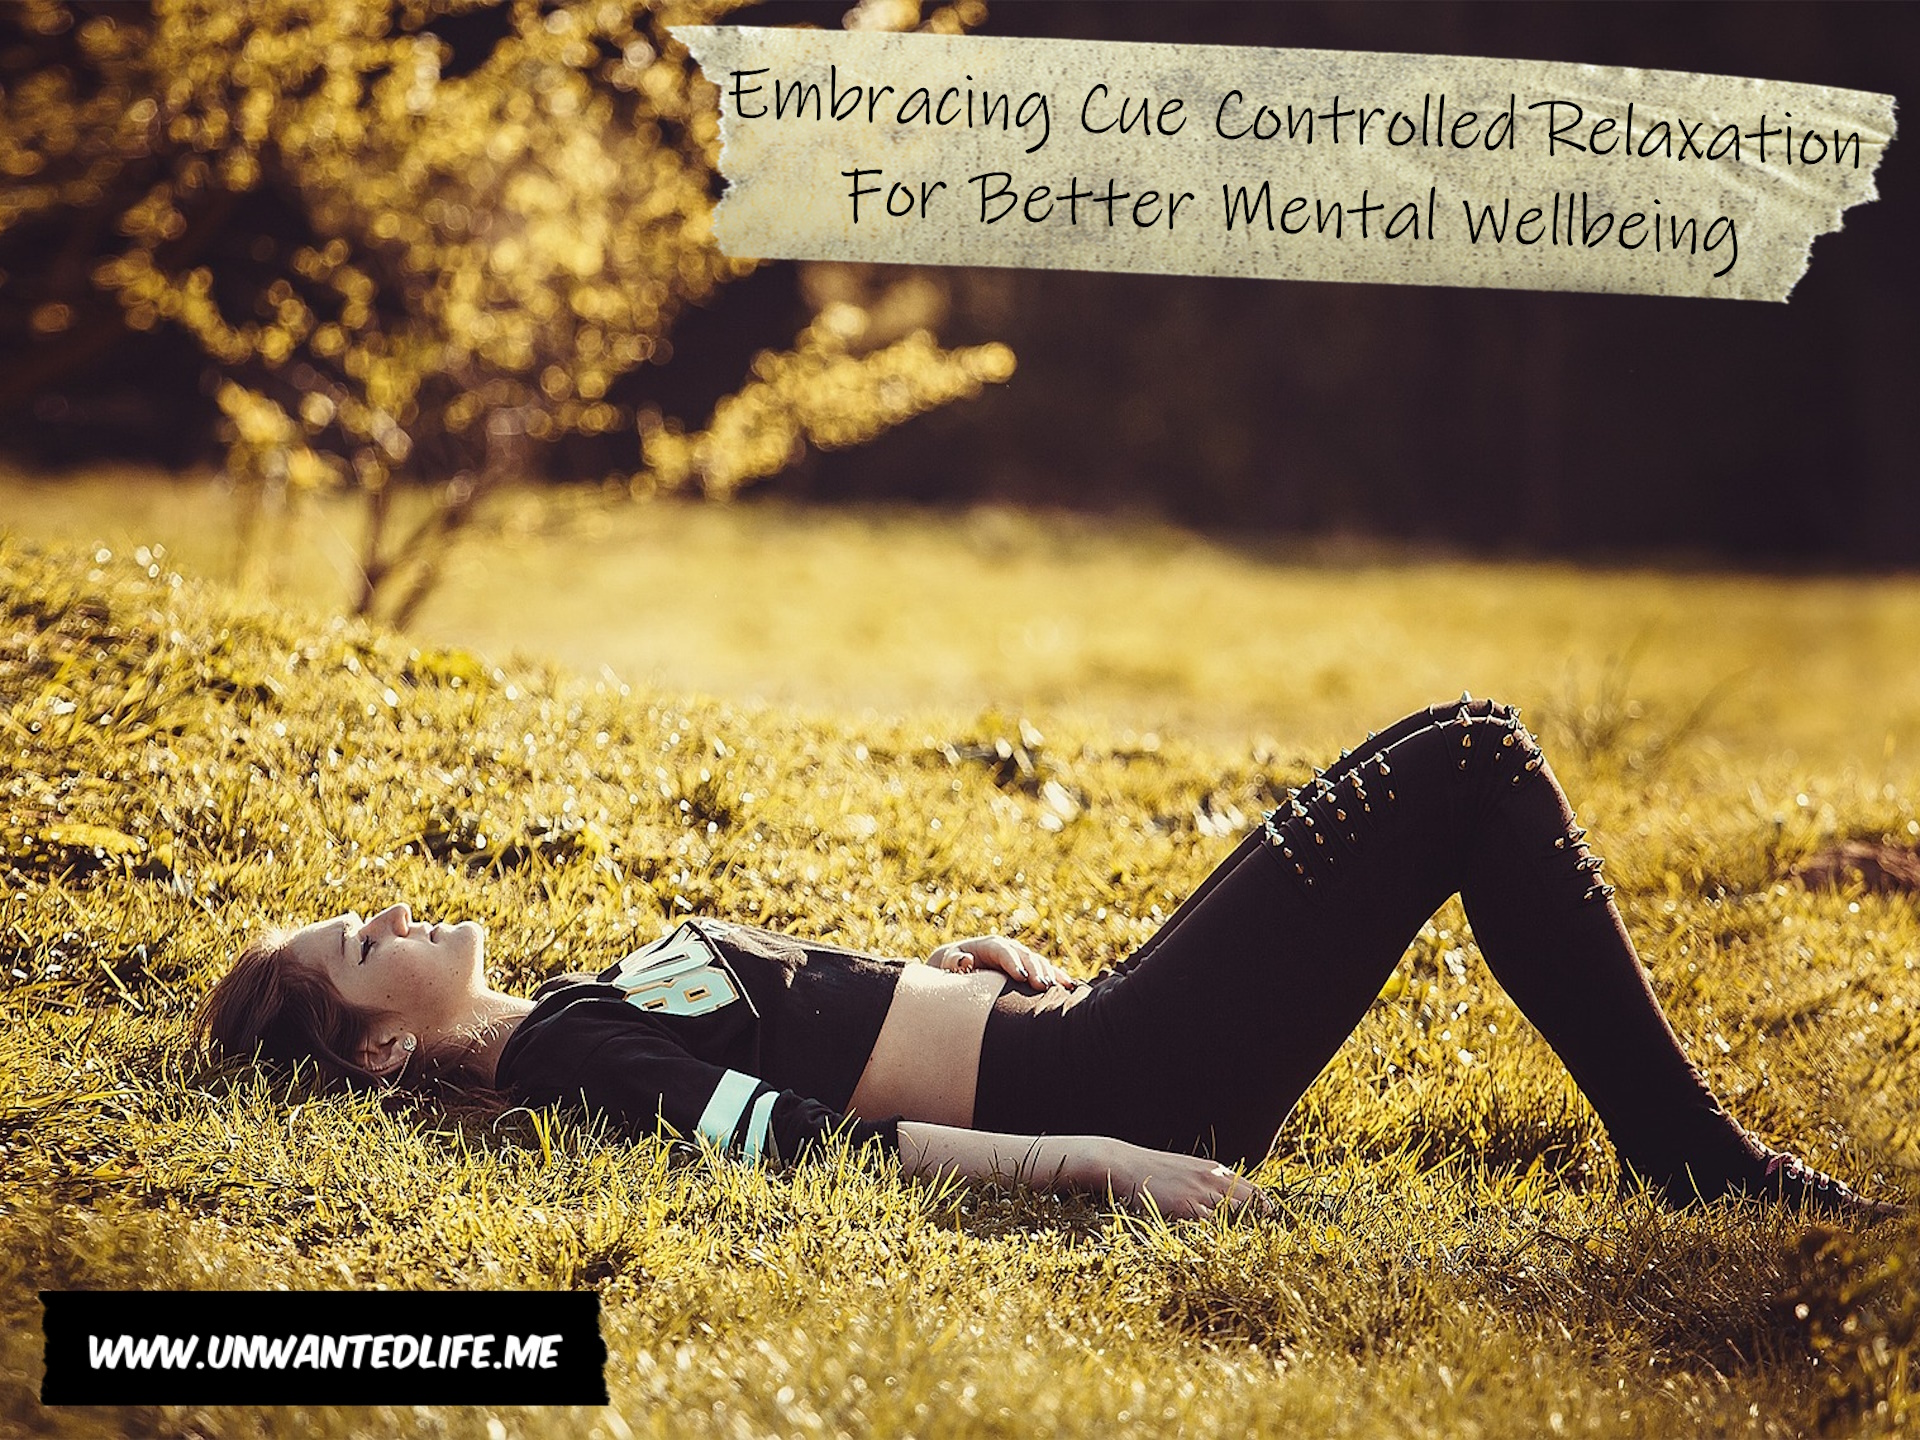 A photo of a White goth laying in a field relaxing to represent the topic of the article - Embracing Cue Controlled Relaxation For Better Mental Wellbeing